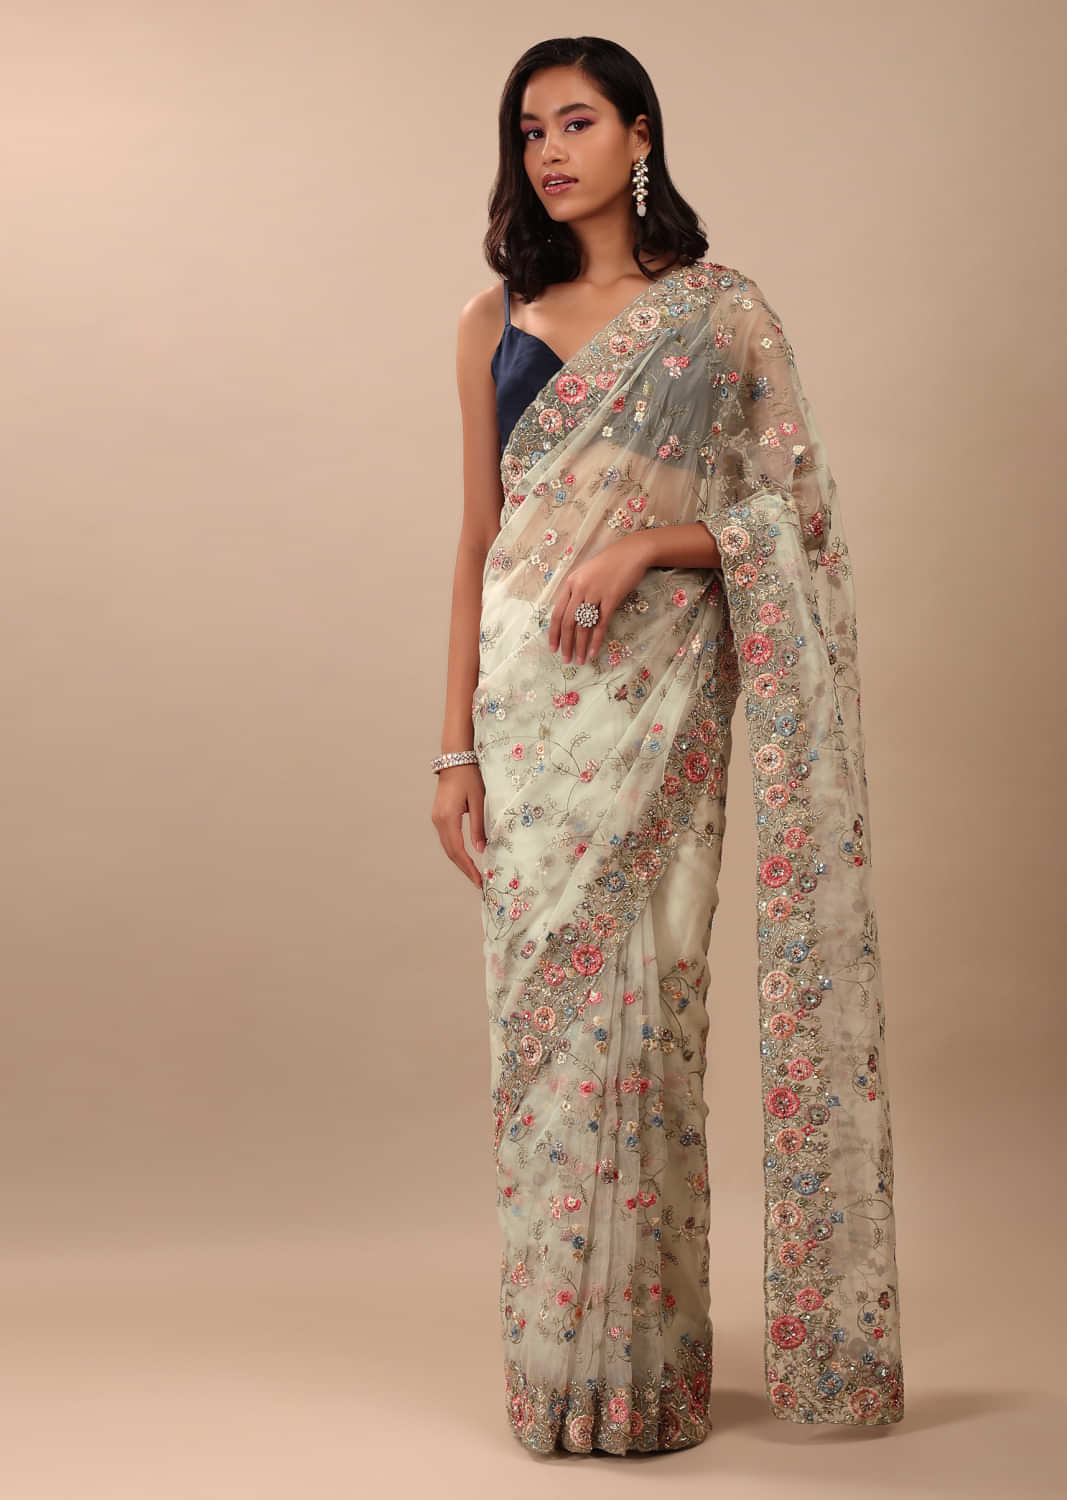 Pista Green Organza Saree Fully Embroidered In Multi-colour Floral Jaal Pattern With Cut Dana & Moti